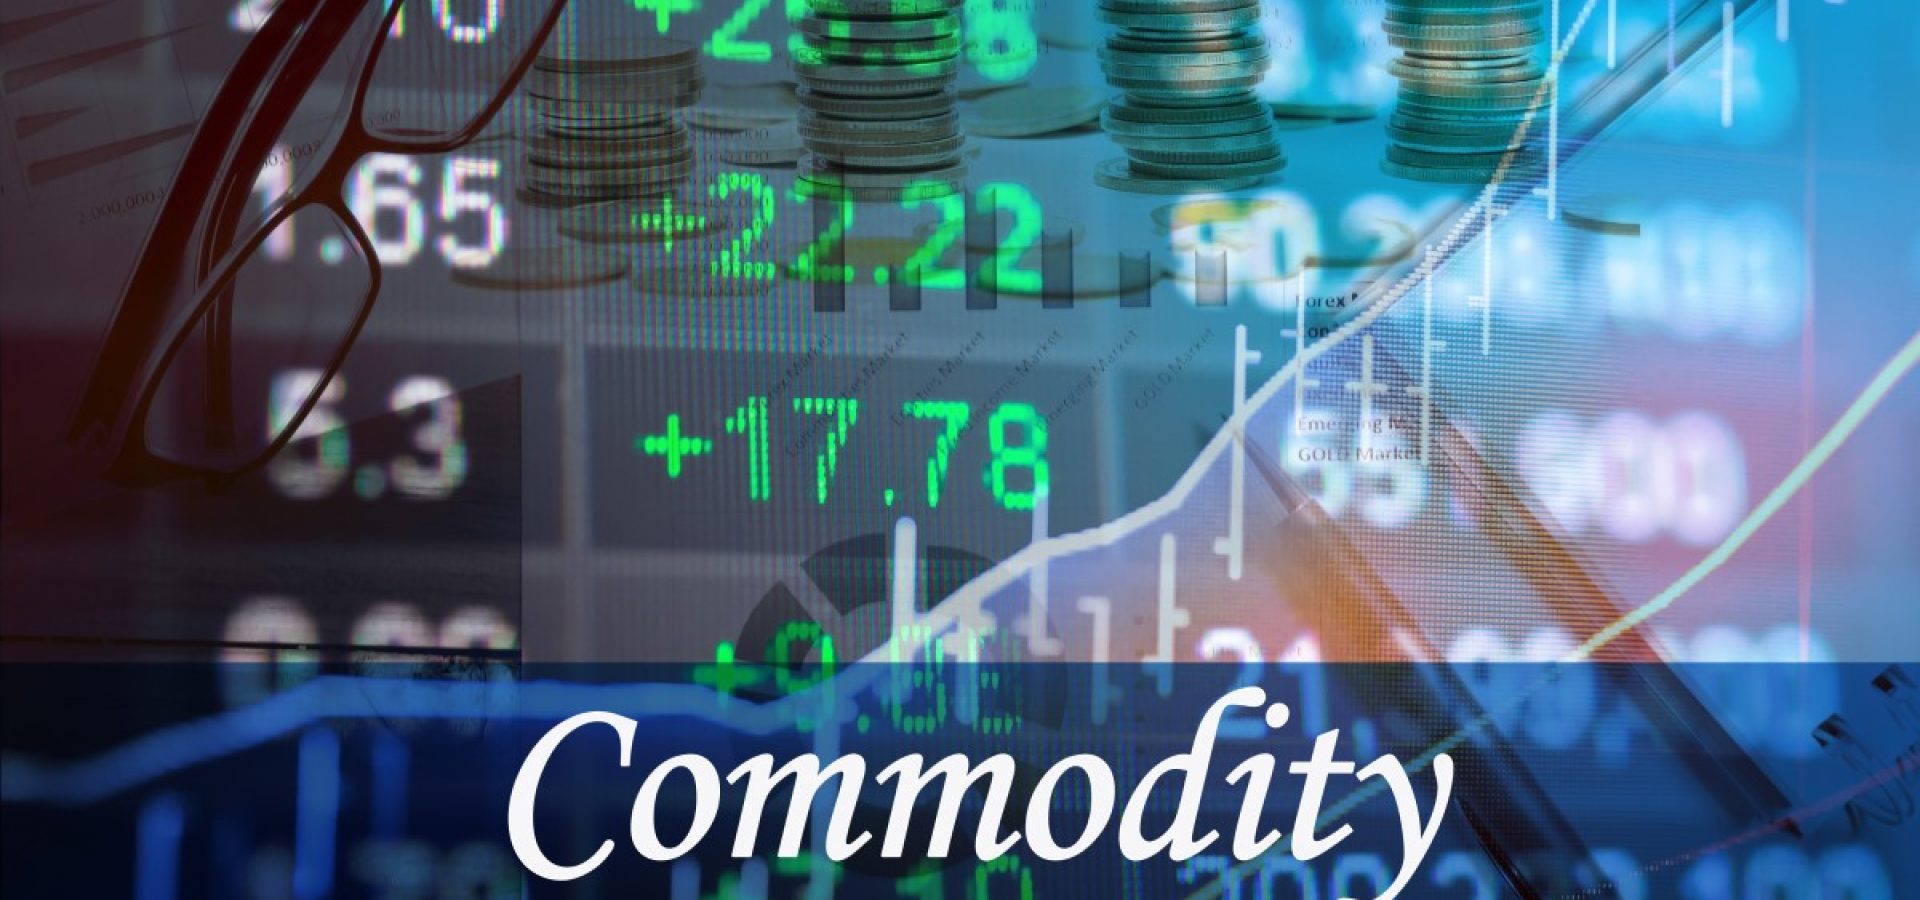 Commodities and markets